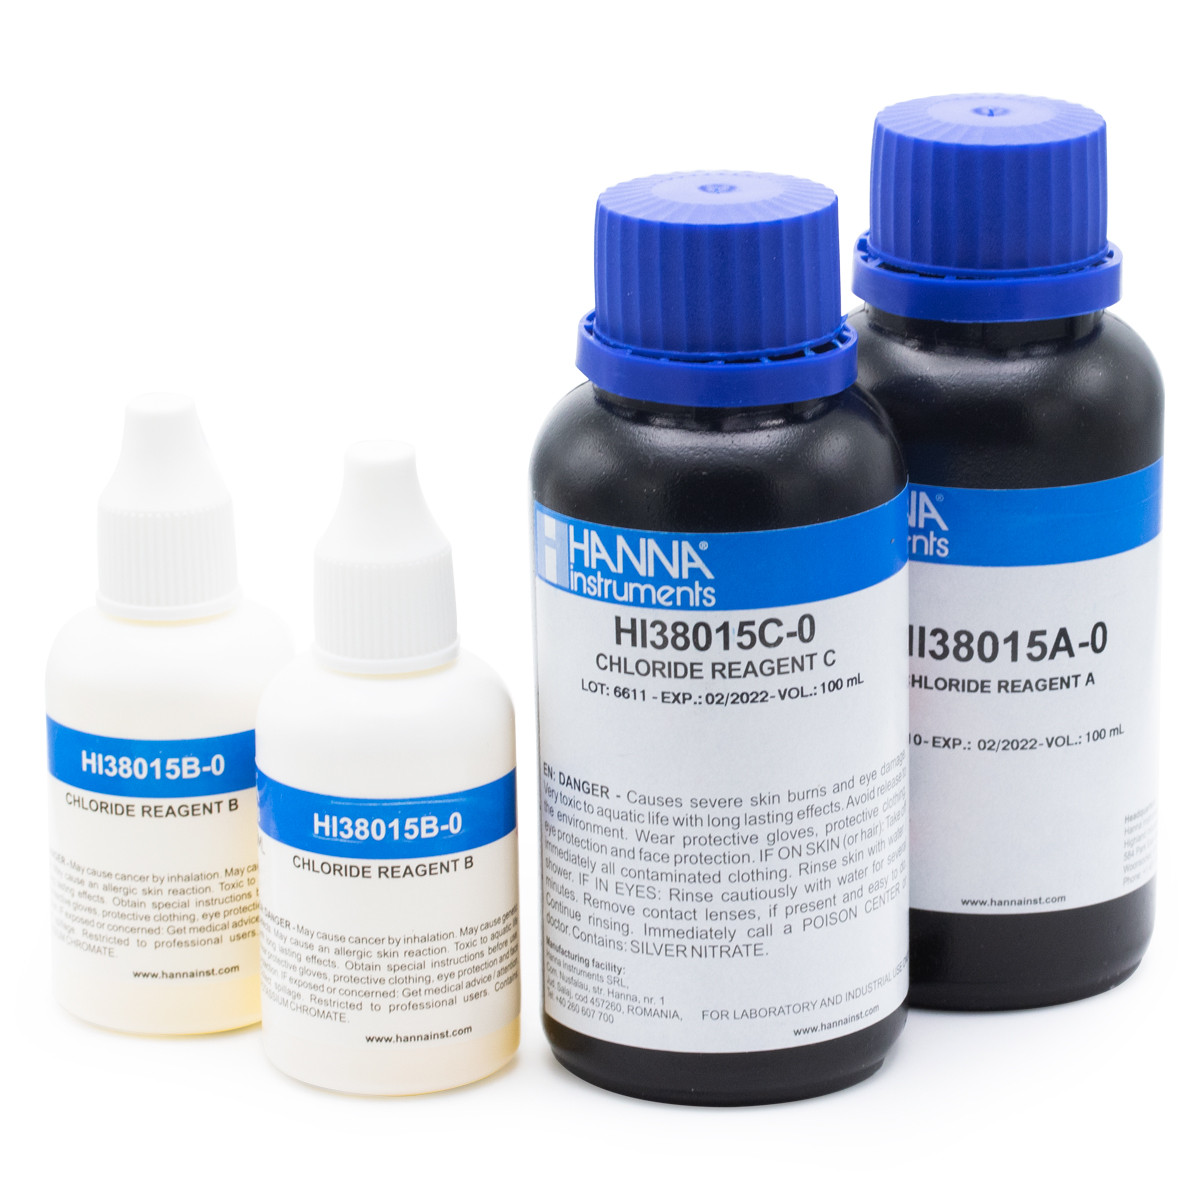 Extended Range Chloride Test Kit Replacement Reagents (100 tests)